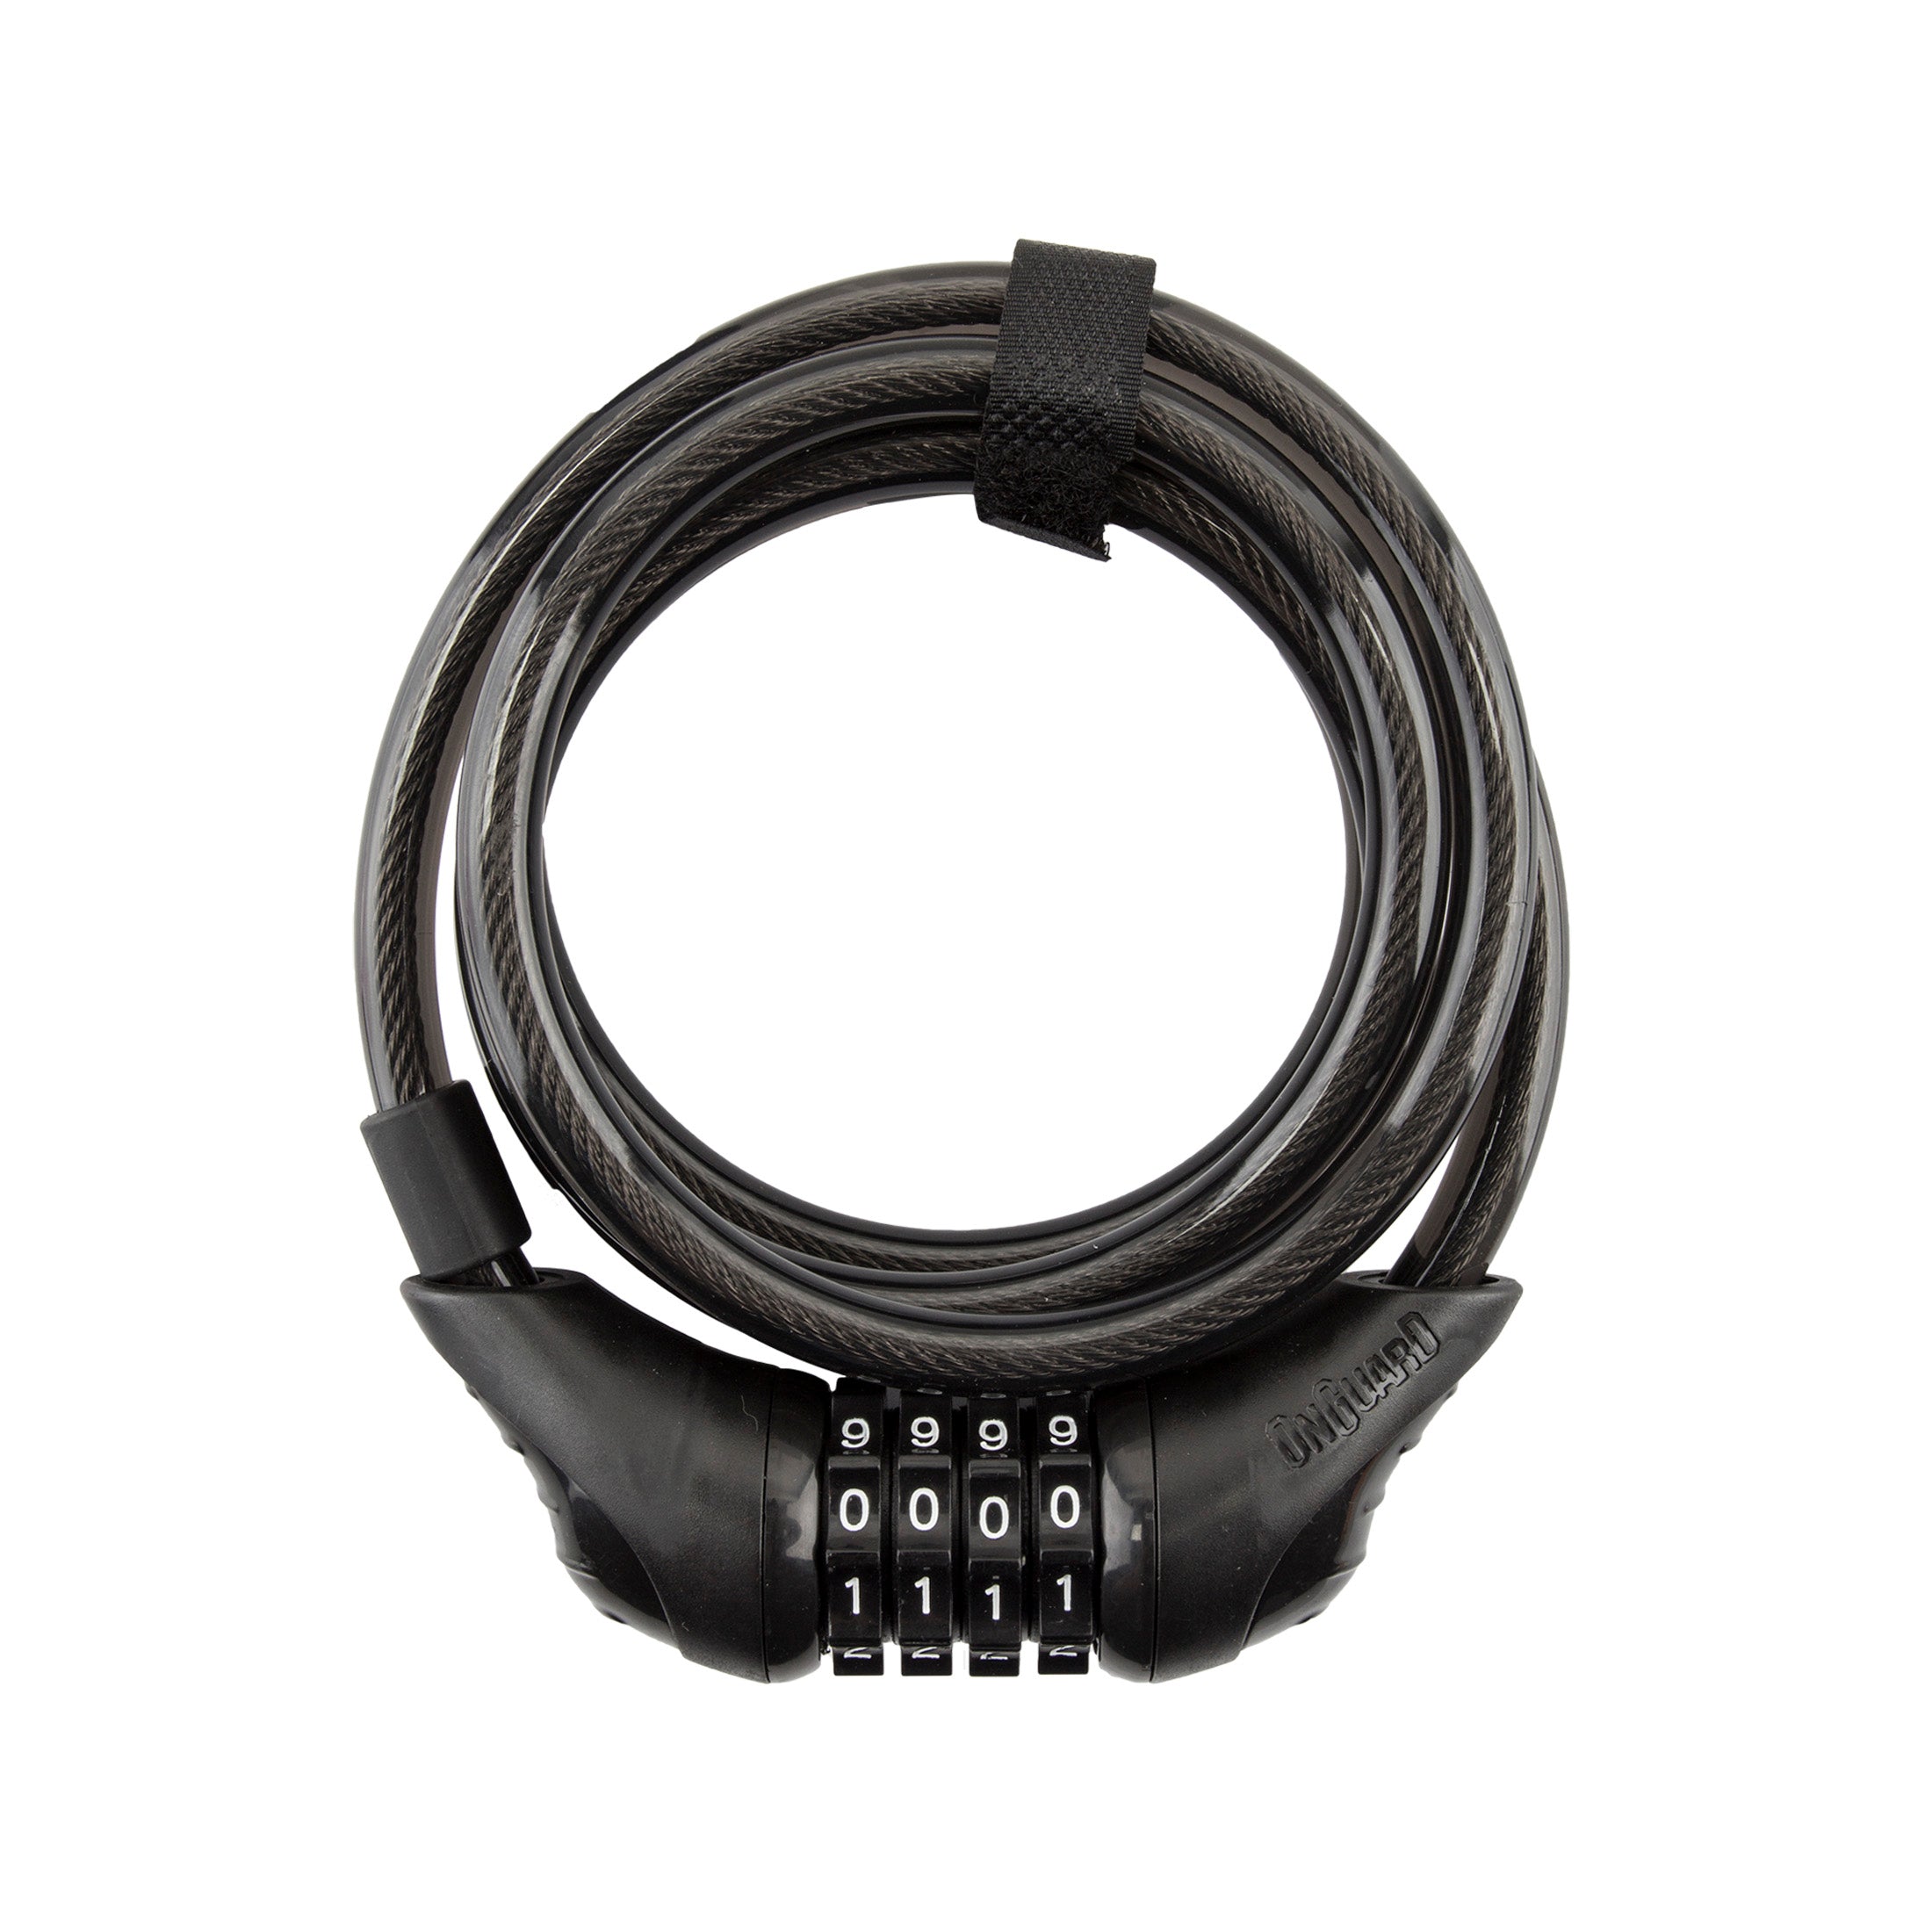 OnGuard 8160 Neon Coil Combo Lock 180cm x 10mm - The Bikesmiths